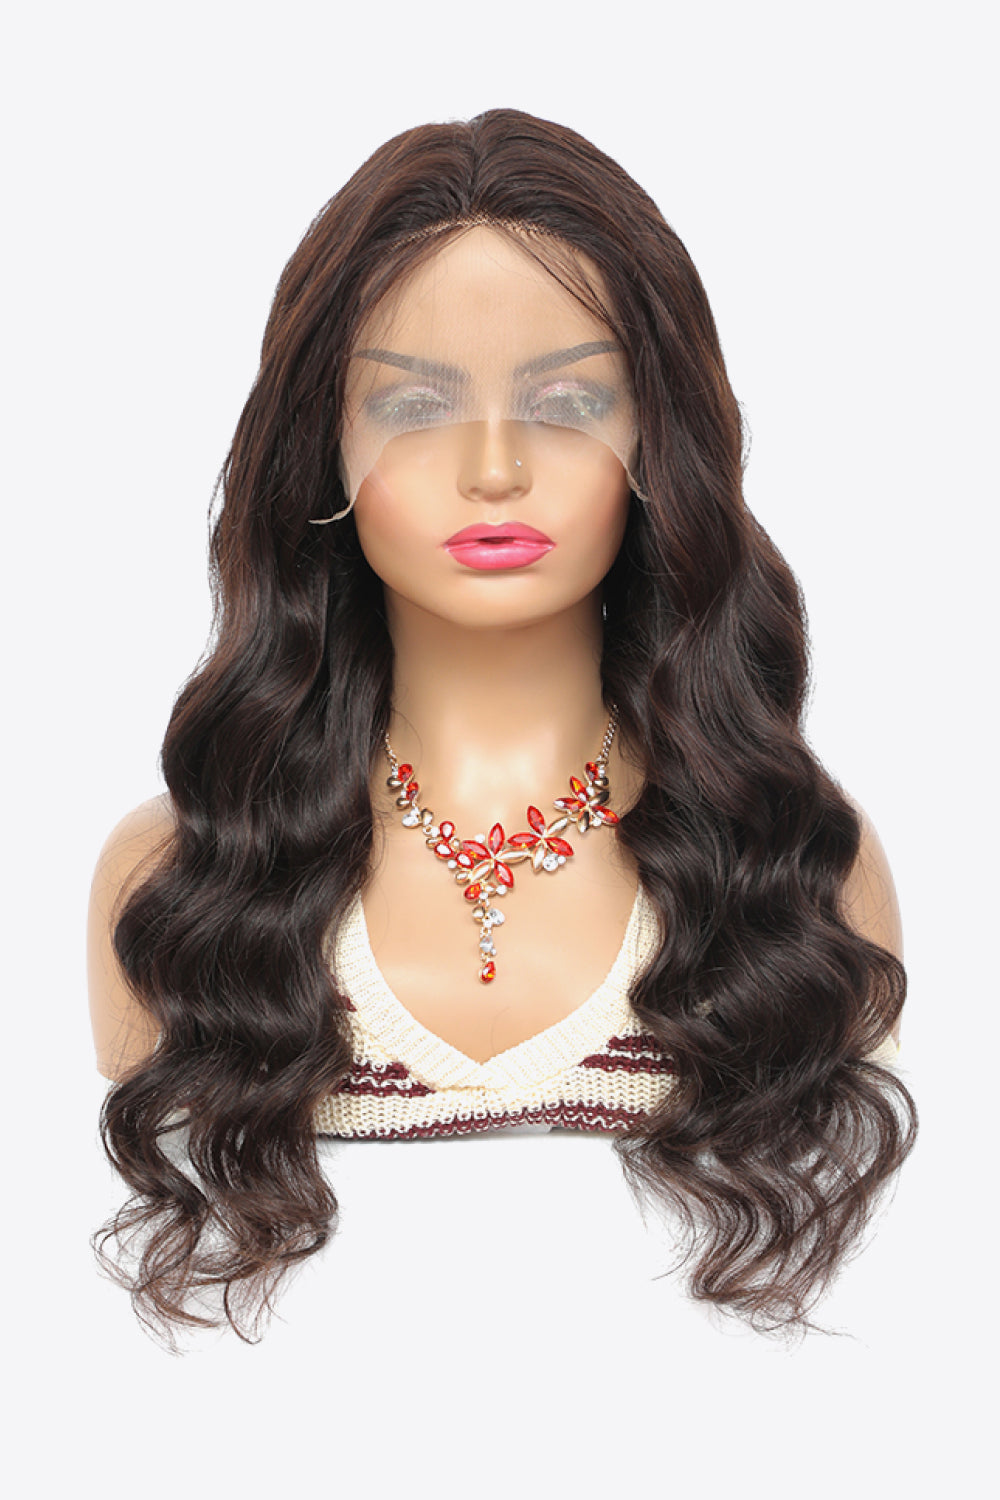 Lace Front Wigs Body Wave Human Virgin Hair Natural Color 150% Density